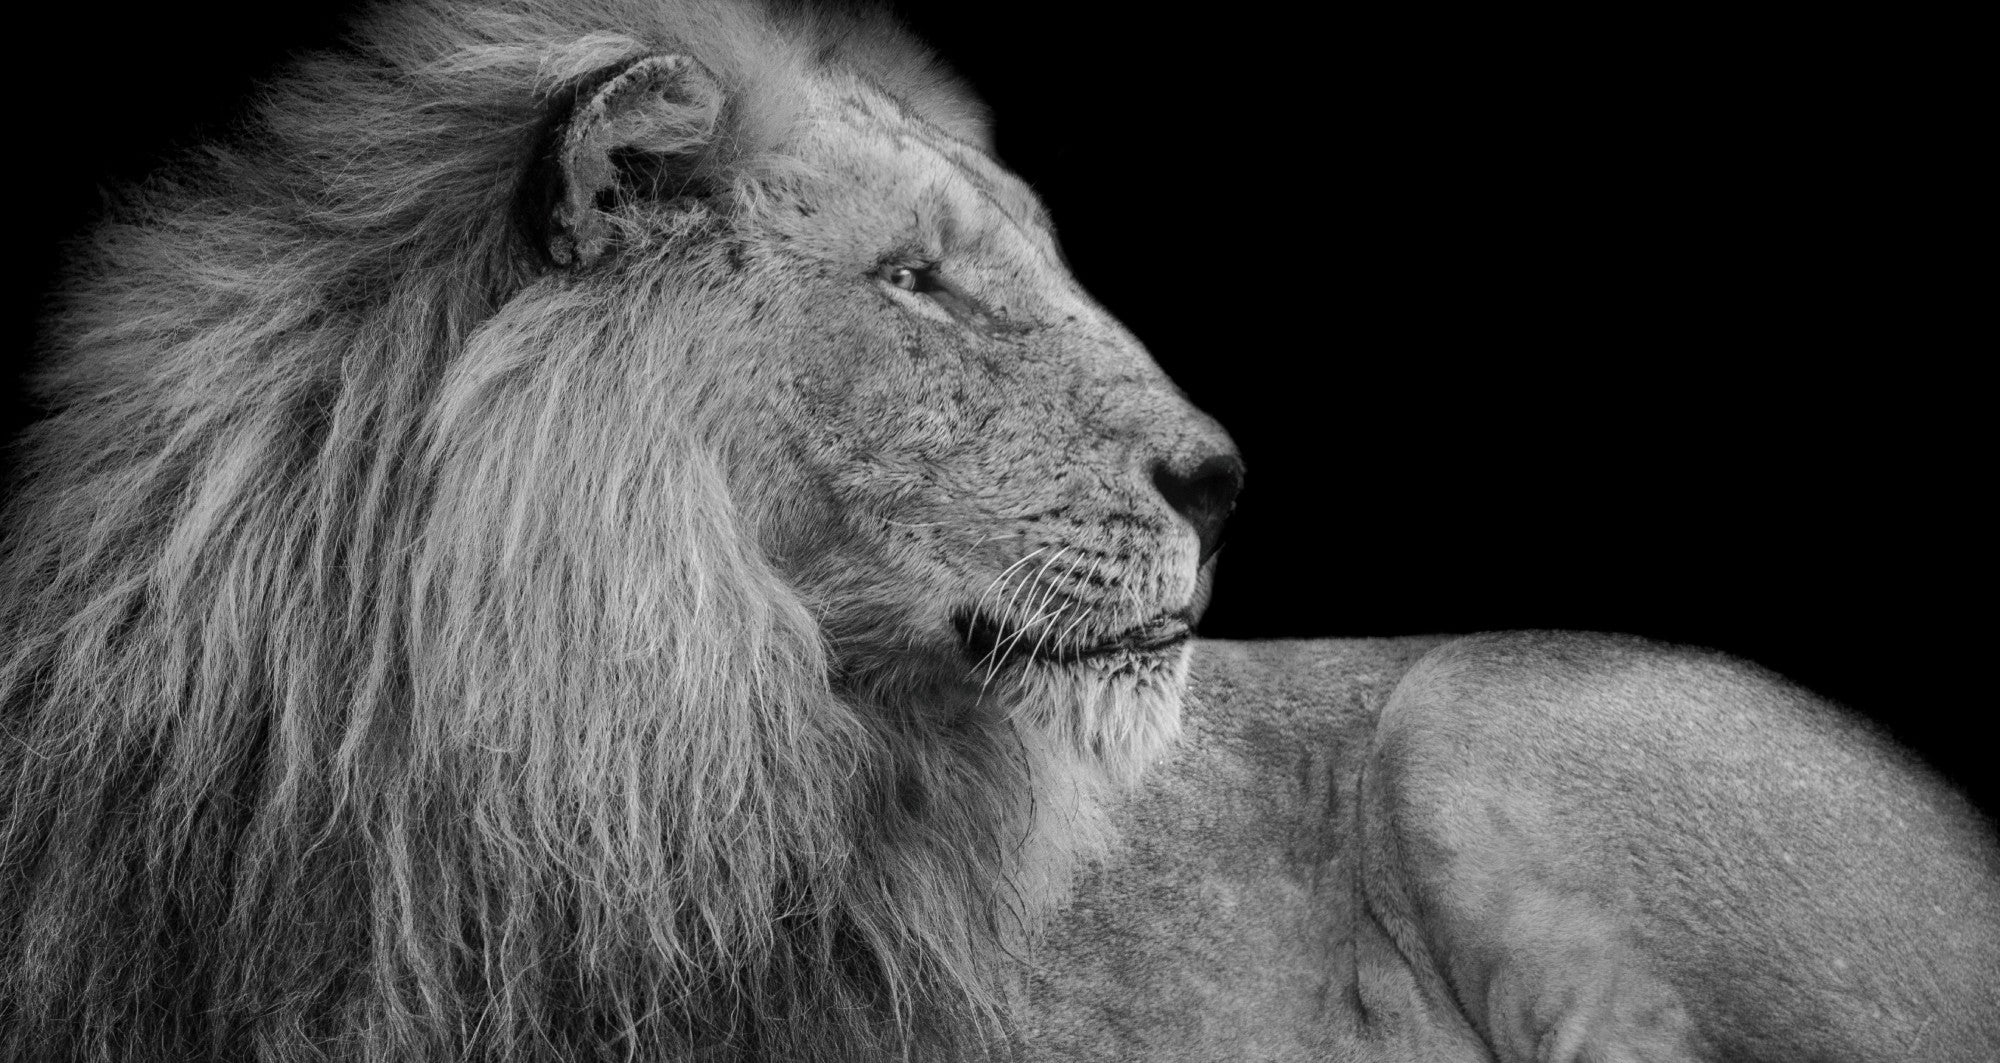 wildlife photography in black and white